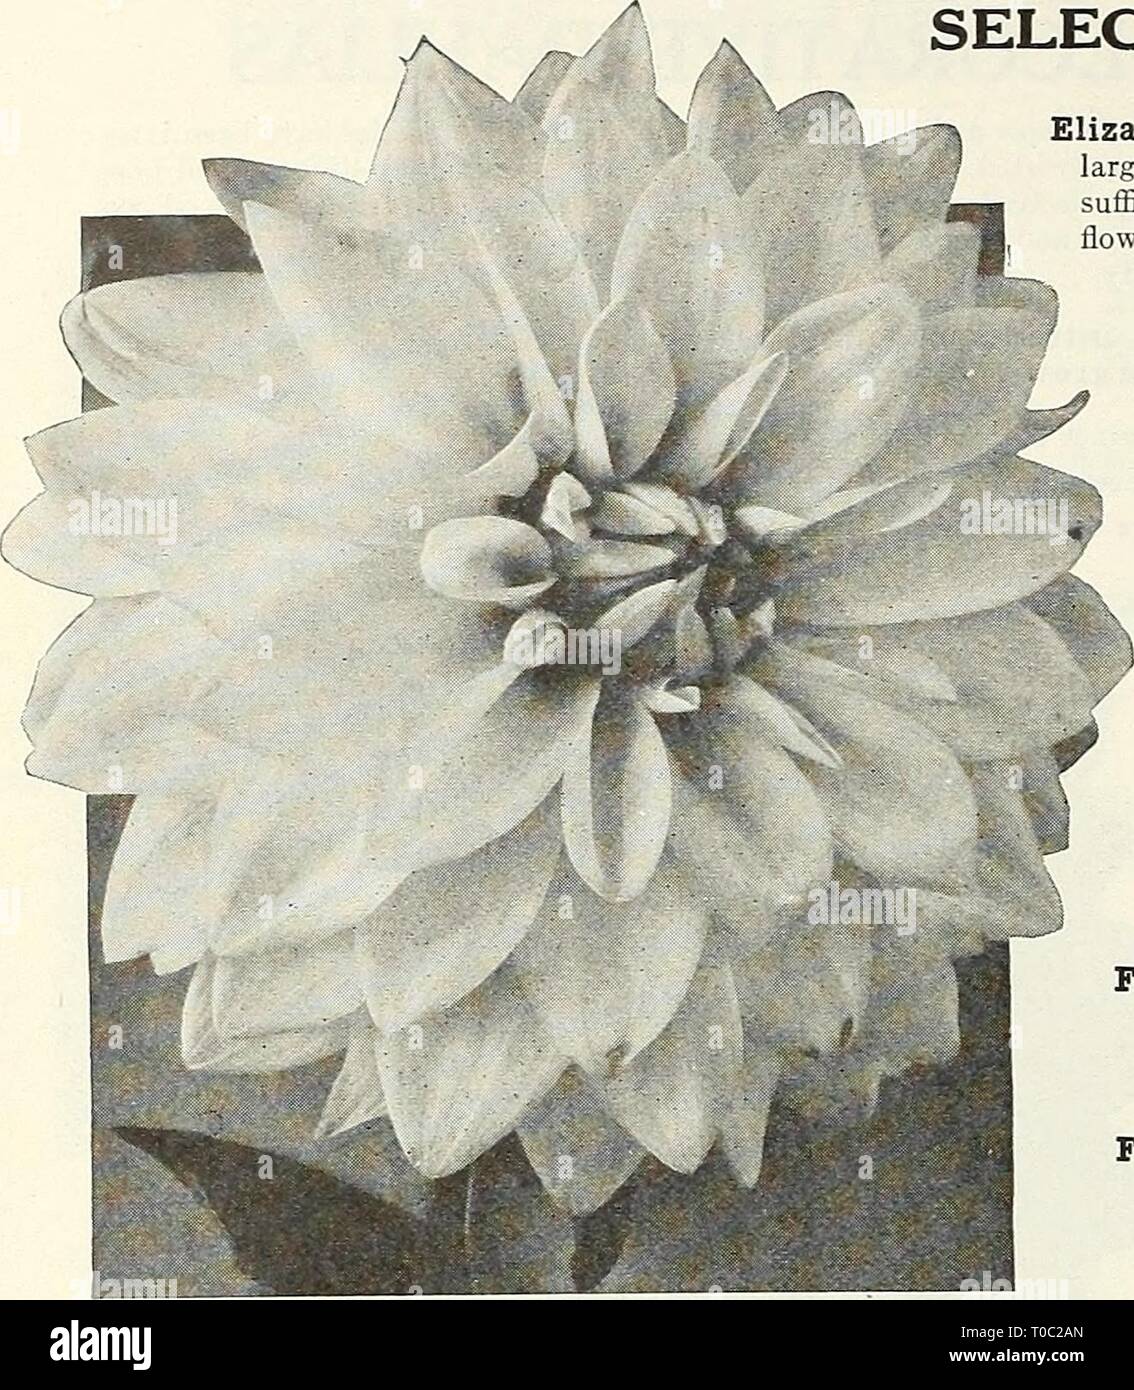 Dreer's garden book 1926 (1926) Dreer's garden book 1926 dreersgardenbook1926henr Year: 1926  148 (flEmyAJKEE^ .gardens™ GREENHOUSE pLANTA &gt;HlLSIlElPm    Decorative Dahlia, Duchesse de Vendome Dolly Varden. One of the earliest and freest flowering varieties with wonderfully beautiful good sized flowers. The petals curling and twisting delightfully develop a most graceful and attractive bloom of irregular formation. Its color is also most pleasing, a pretty shade of cameo-pink shading to a creamy- pink centre; a splendid cut flower and valuable for garden decoration. S3.00 each. Dolores. A s Stock Photo